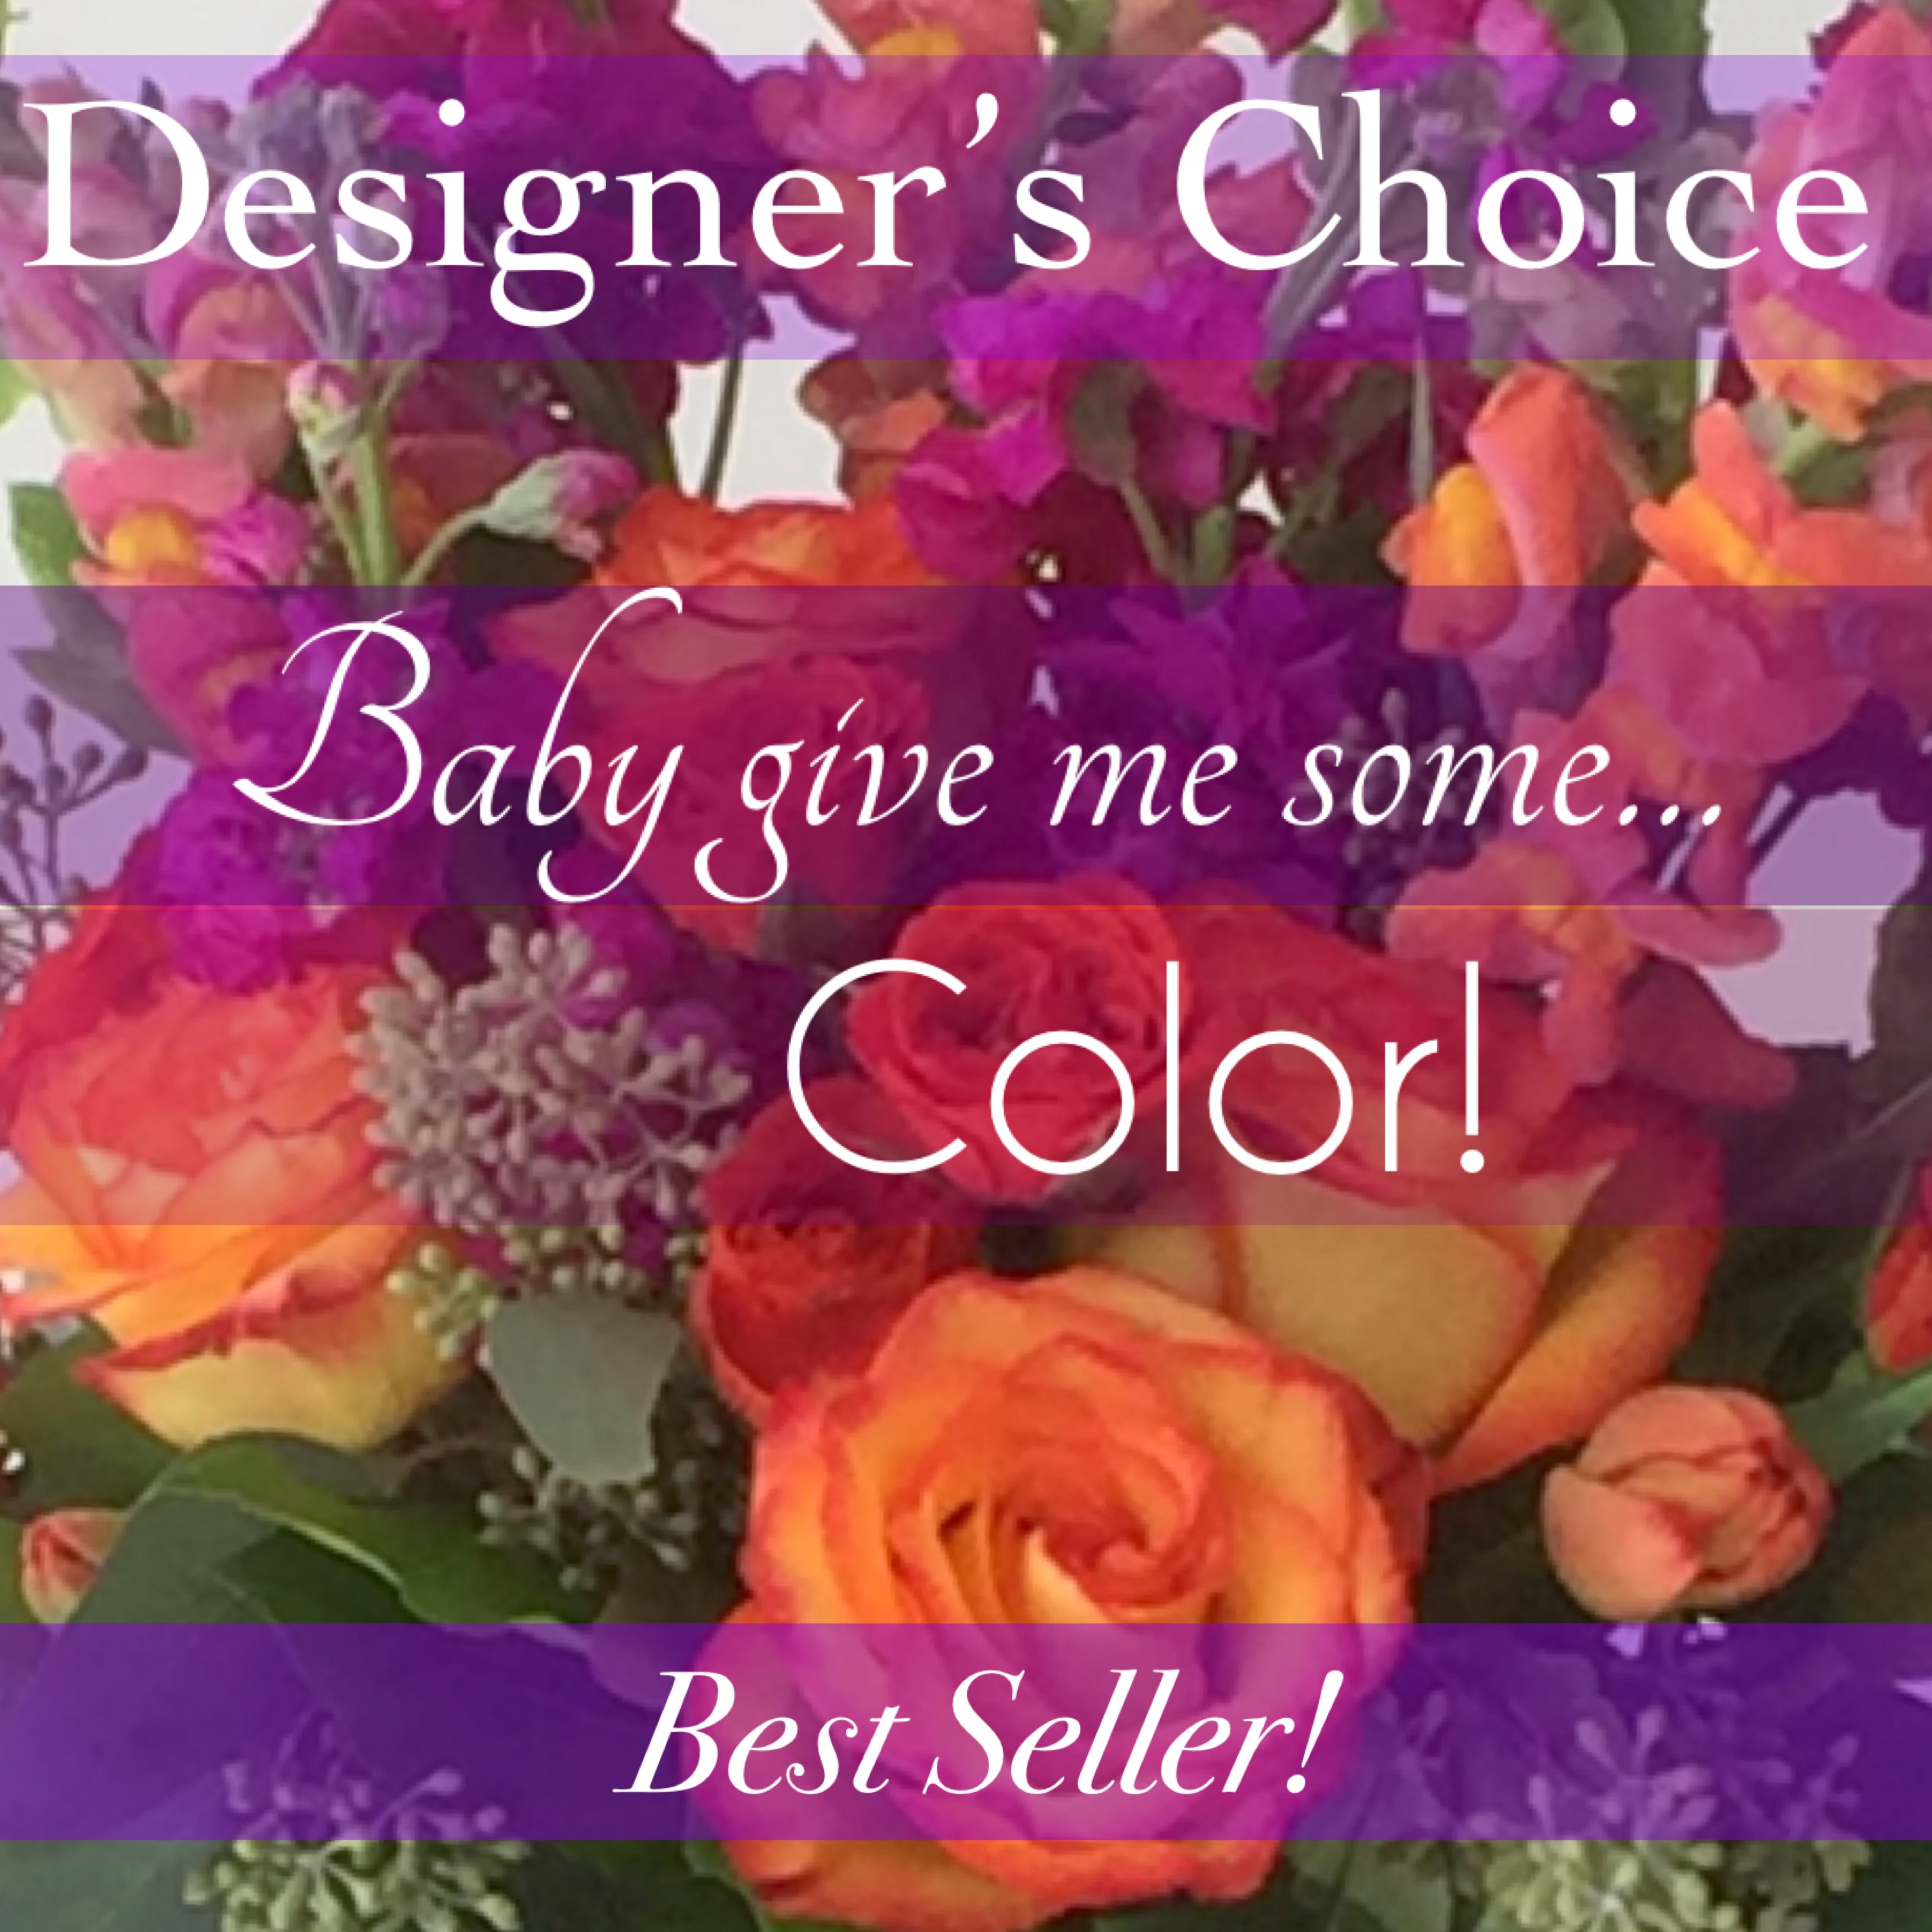 Designer’s Choice Bold and Colorful Mix - At Flora Verdi choosing “Designer’s Choice” is ALWAYS  the way to go! Designed in a BOLD and COLORFUL palette of oranges, purples, and fuscia…your arrangement will include a generous selection of orange and hot pink roses, fuscia stock, snapdragon, liatris, tulips, and other premium garden-type blooms. * price increase reflects increase in added roses and premium flowers.  